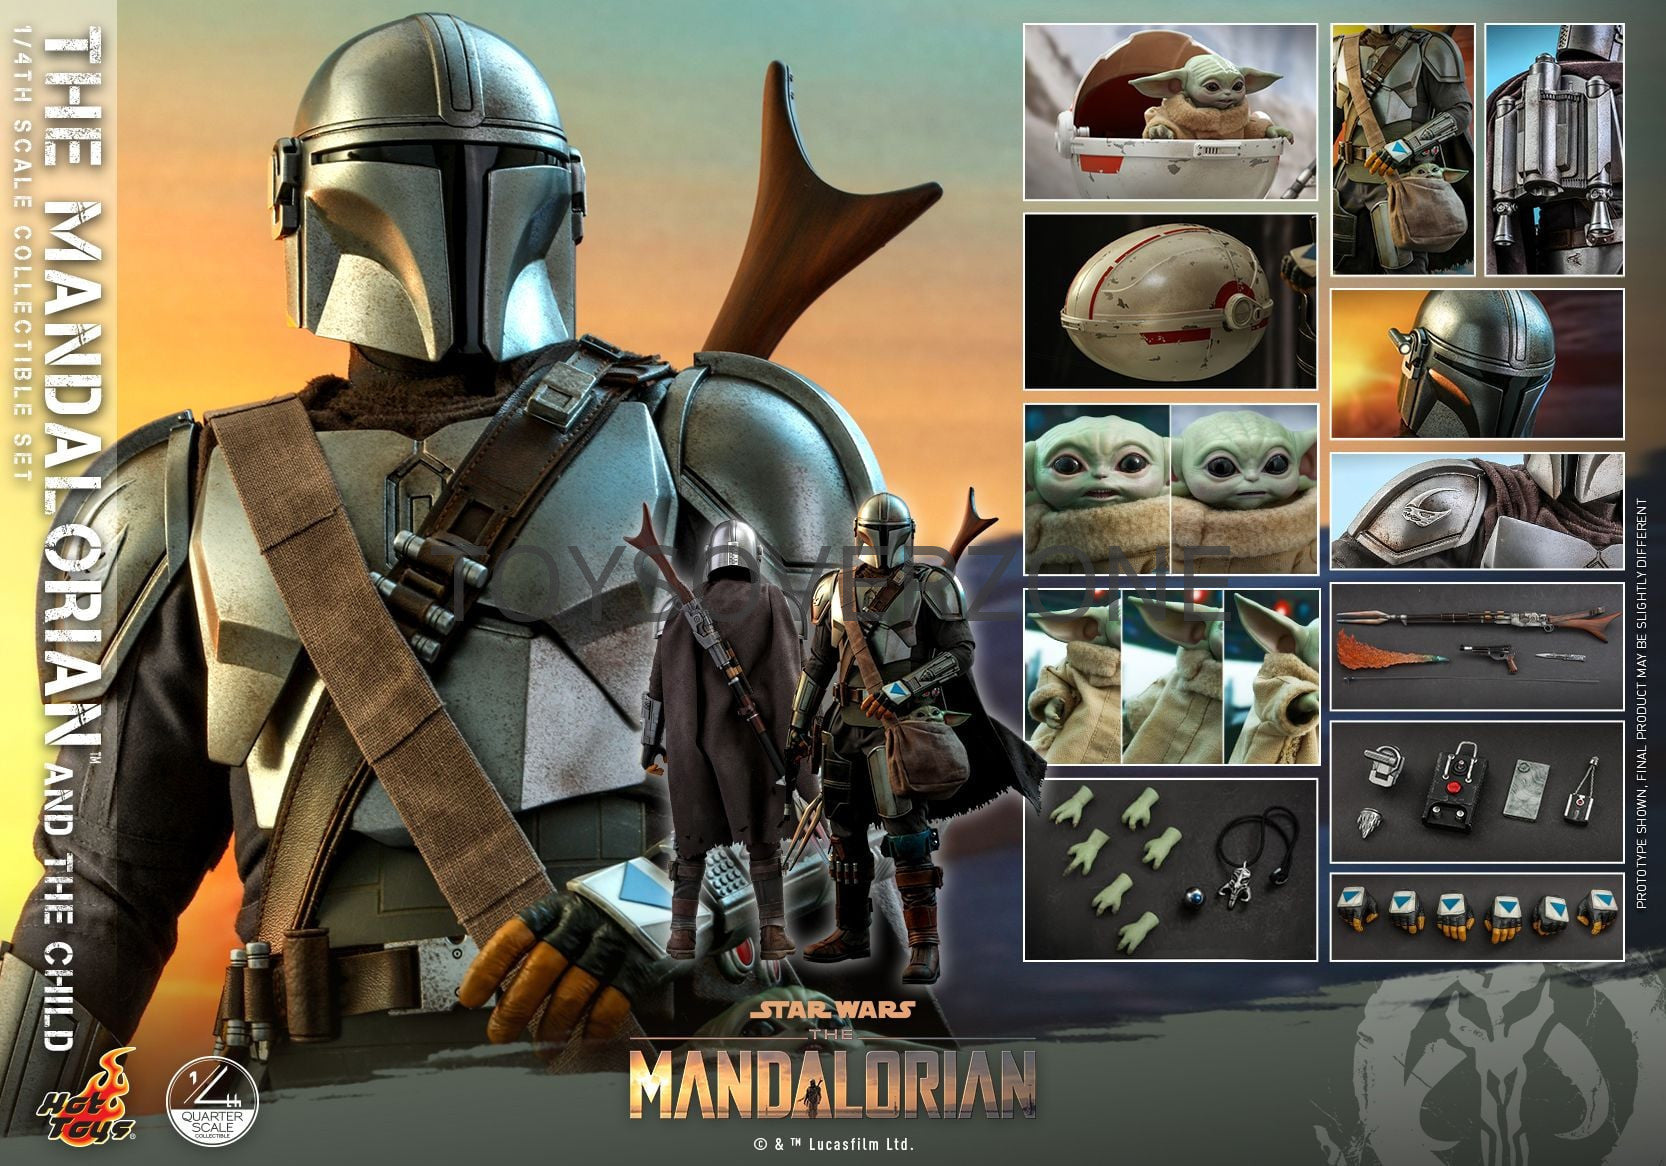 QS016 - Star Wars™ The Mandalorian™ - 1/4th scale The 